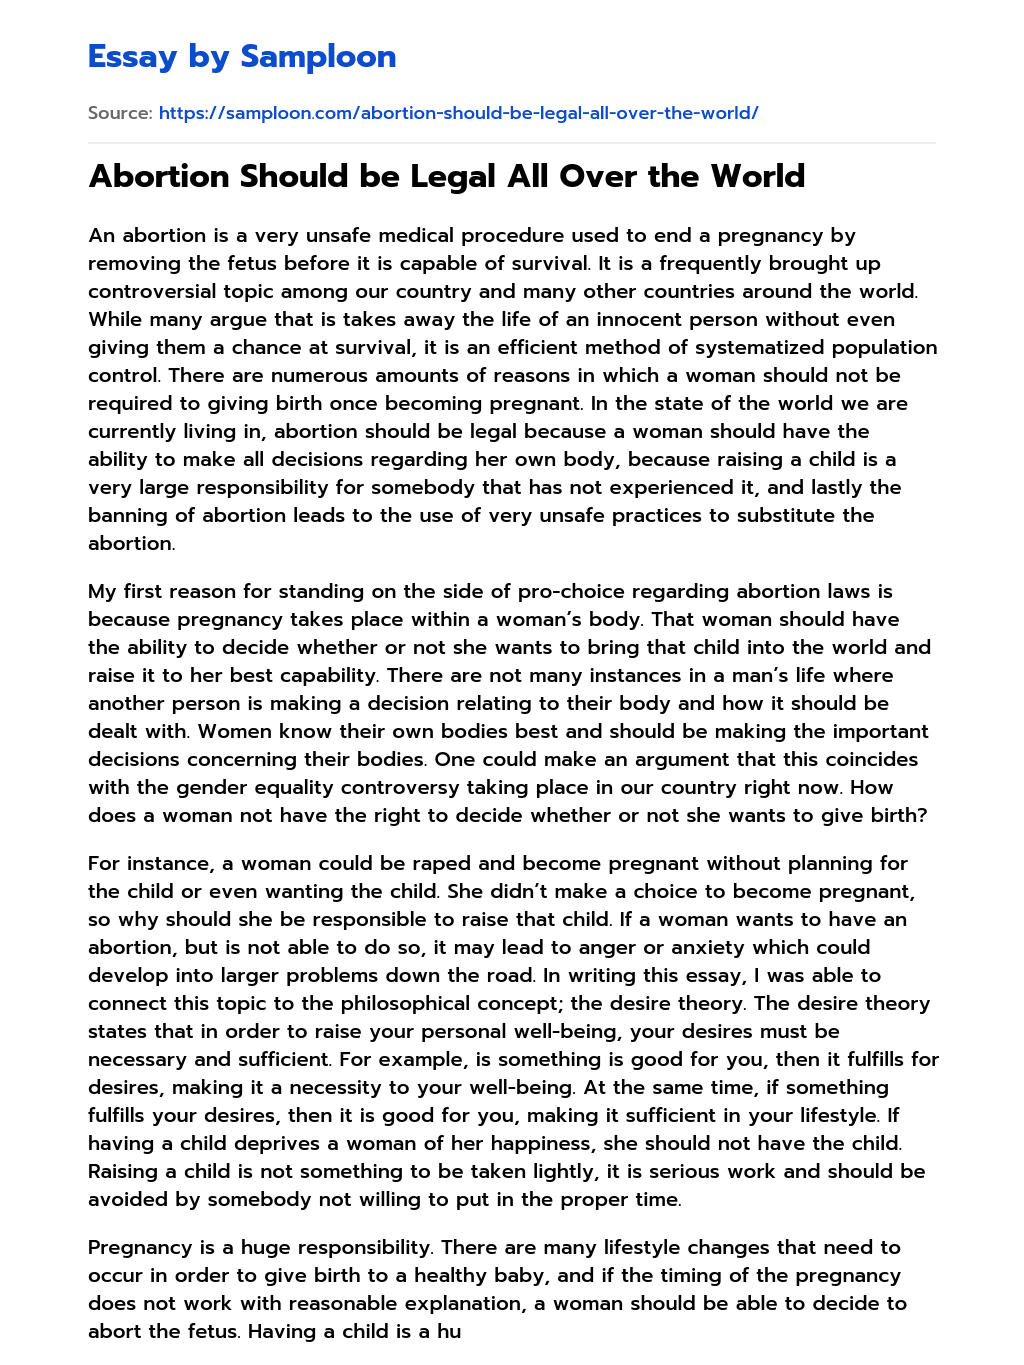 Abortion Should be Legal All Over the World essay